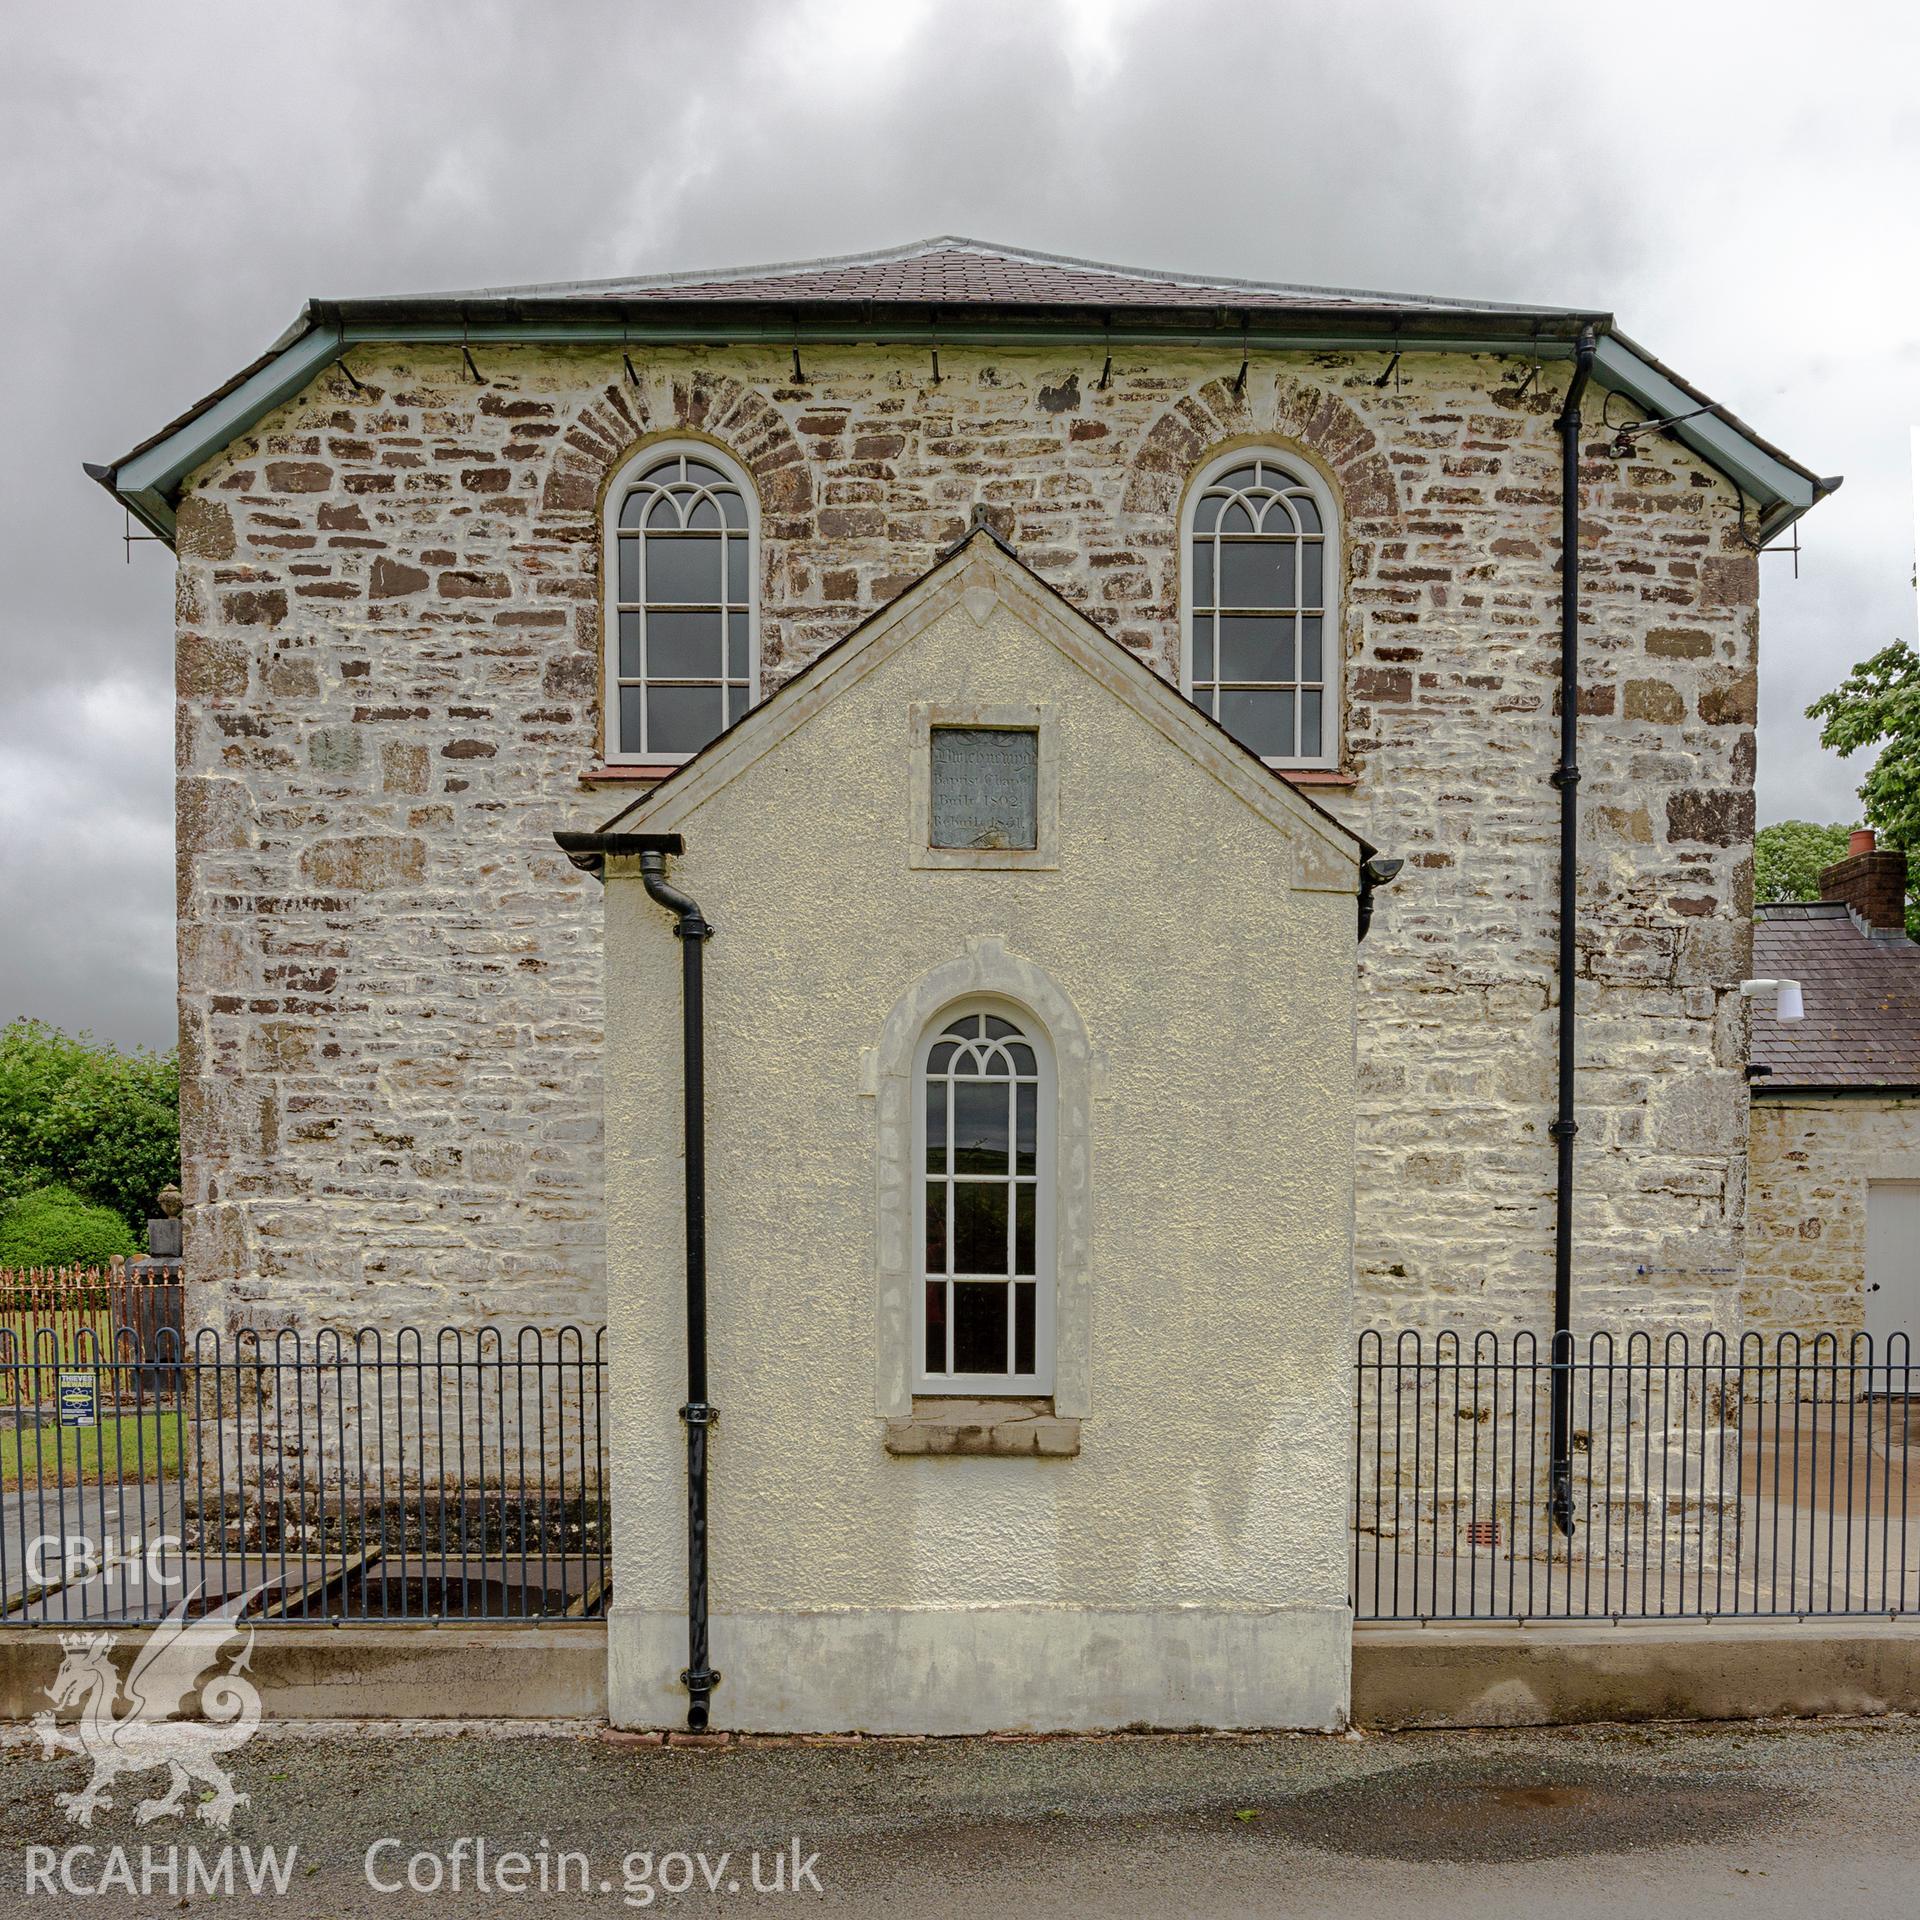 Colour photograph showing front elevation of Bwlchnewydd Baptist Church, Halfpenny Furze near Cross Inn, Laugharne. Photographed by Richard Barrett on 20th June 2018.